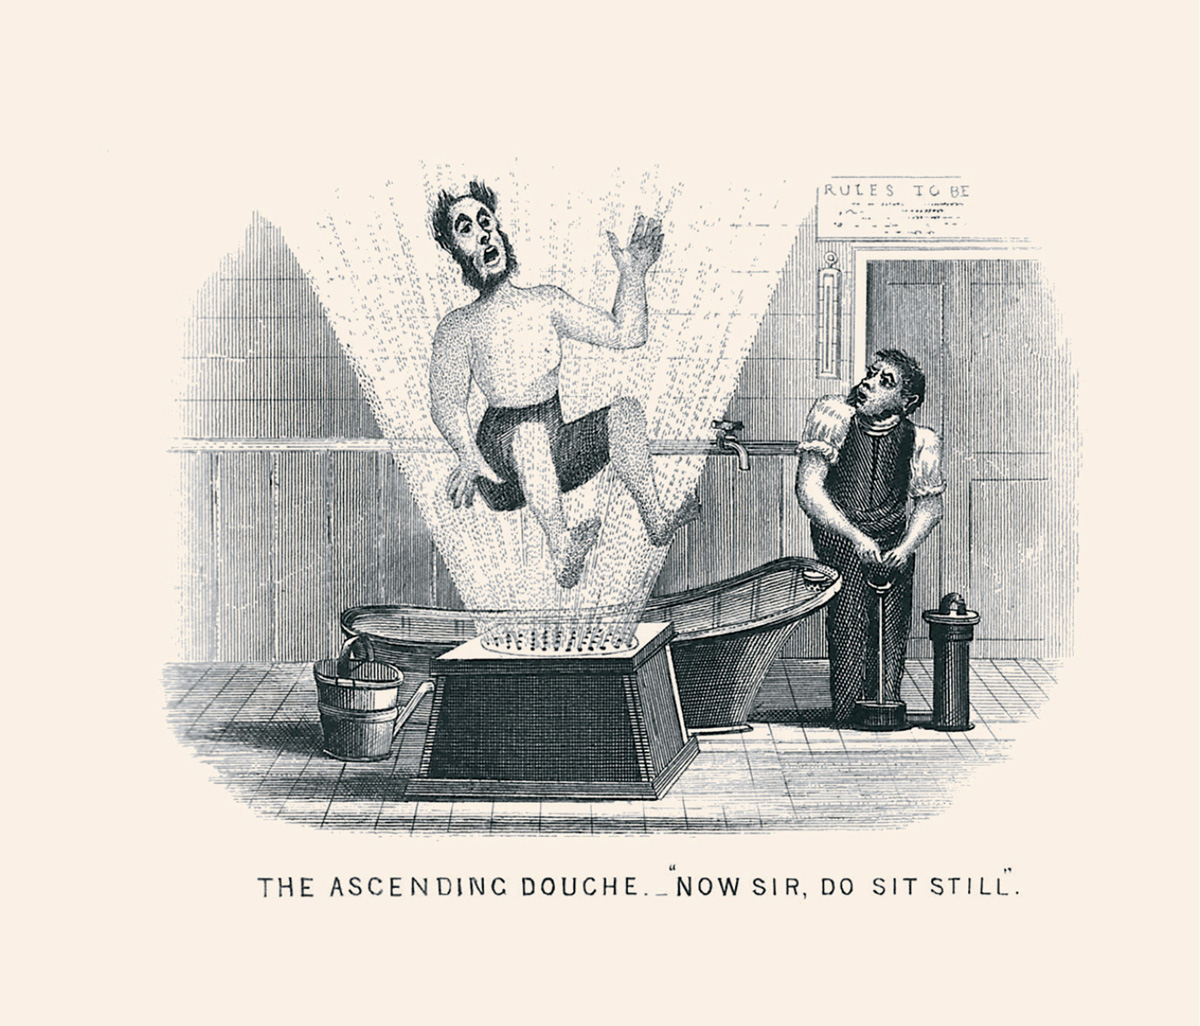 A drawing from the eighteen sixty nine British book “The Water Cure Illustrated of a man being being lifted off his feet by a powerful spray of water. The caption reads: “The ascending douche. “Now Sir, do sit still.”